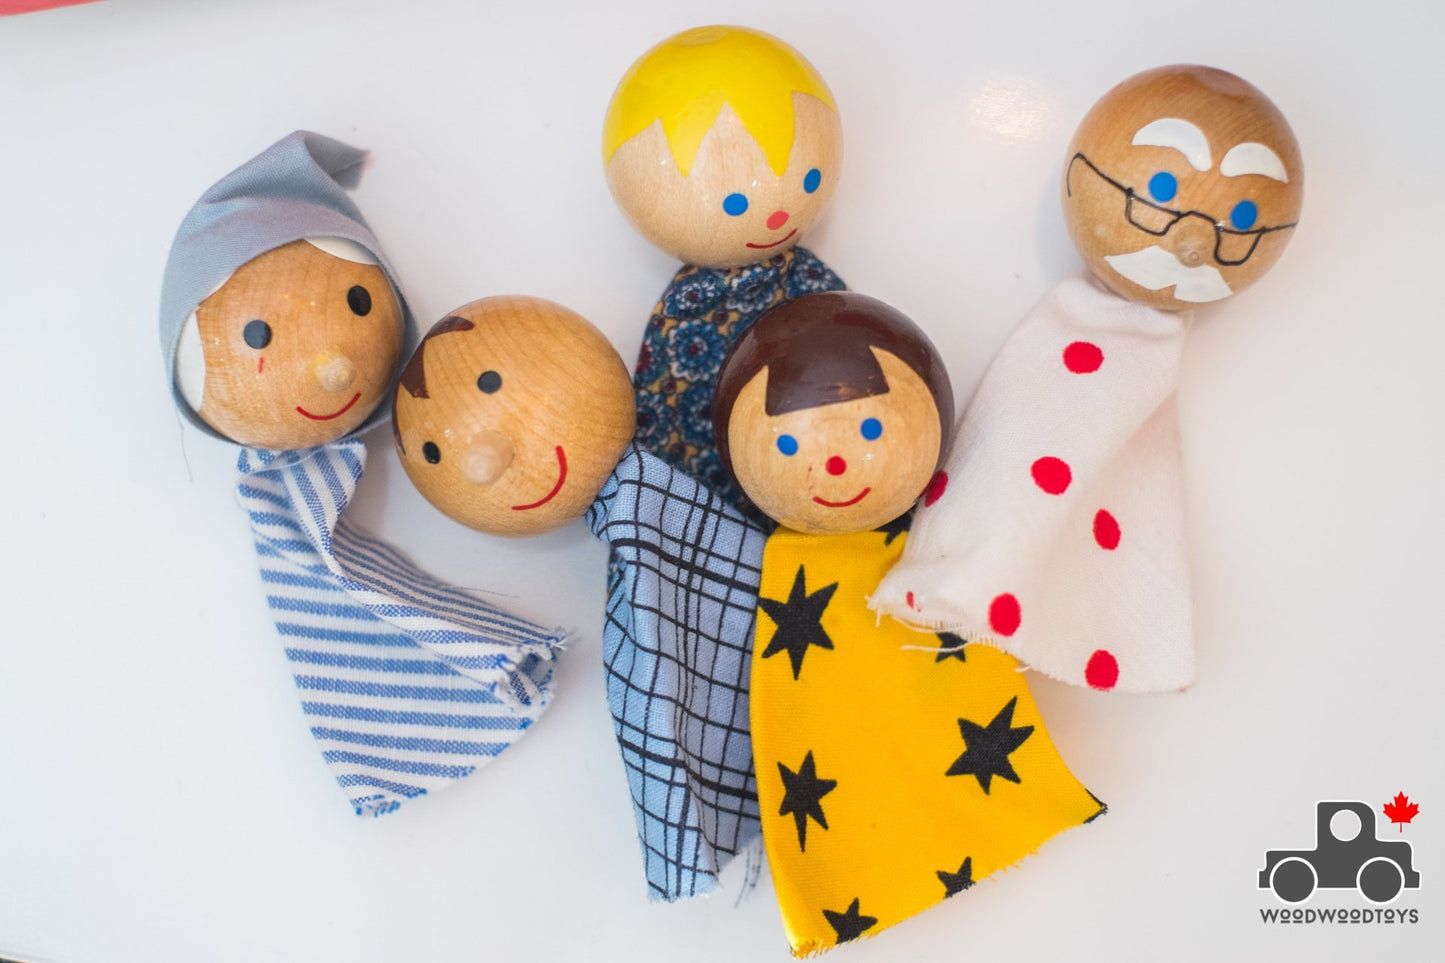 Vintage Tofa Wooden Finger Puppets - Handmade in Czechoslovakia - Wood Wood Toys Canada's Favourite Montessori Toy Store